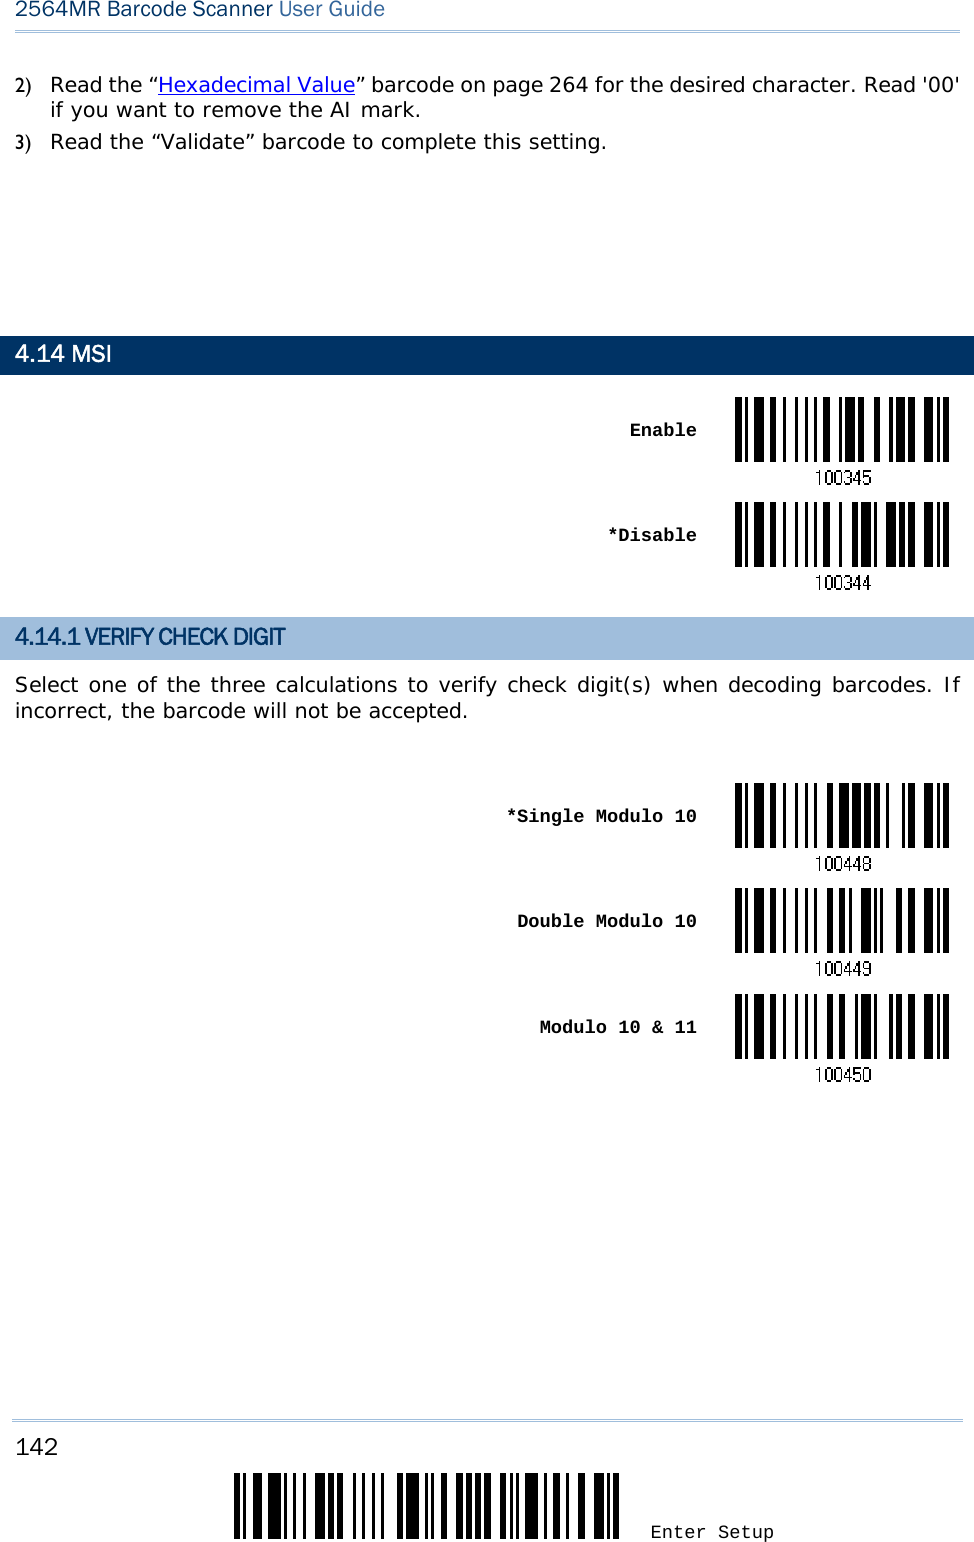 142 Enter Setup 2564MR Barcode Scanner User Guide  2) Read the “Hexadecimal Value” barcode on page 264 for the desired character. Read &apos;00&apos; if you want to remove the AI mark.  3) Read the “Validate” barcode to complete this setting.         4.14 MSI  Enable *Disable4.14.1 VERIFY CHECK DIGIT Select one of the three calculations to verify check digit(s) when decoding barcodes. If incorrect, the barcode will not be accepted.   *Single Modulo 10 Double Modulo 10 Modulo 10 &amp; 11